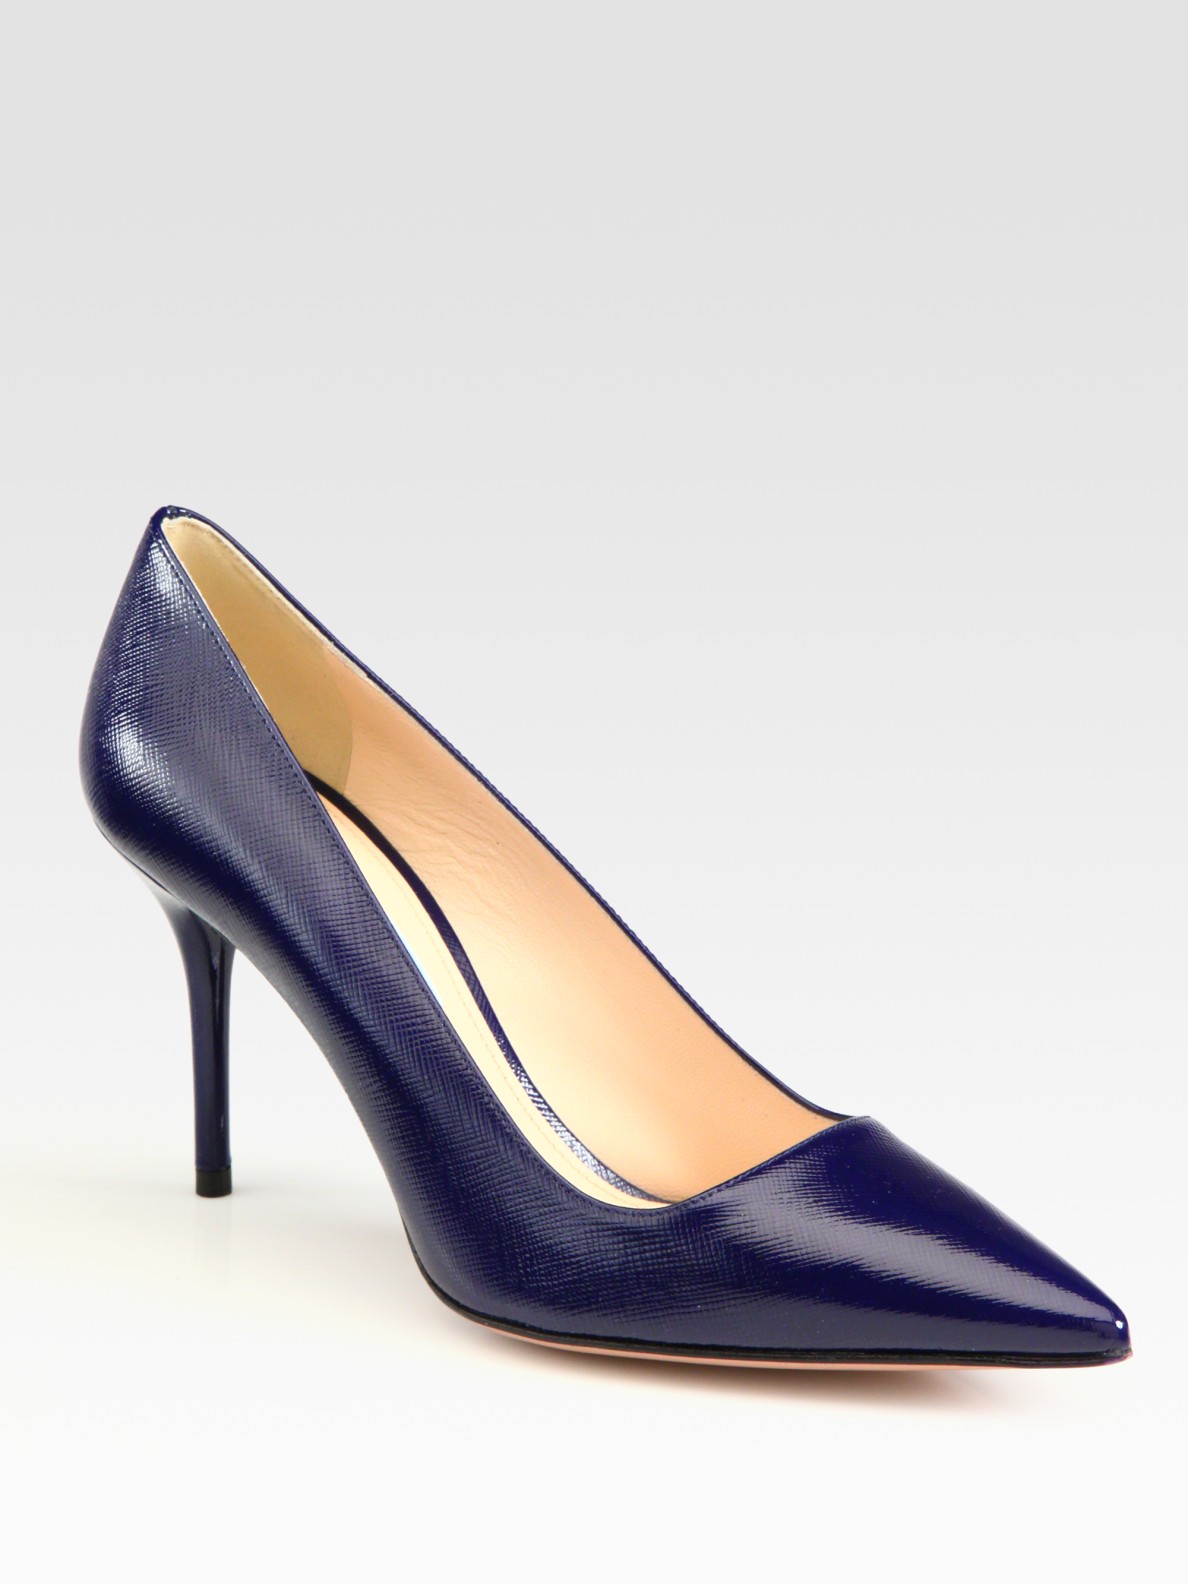 Prada Saffiano Leather Point Toe Pumps in Blue | Lyst